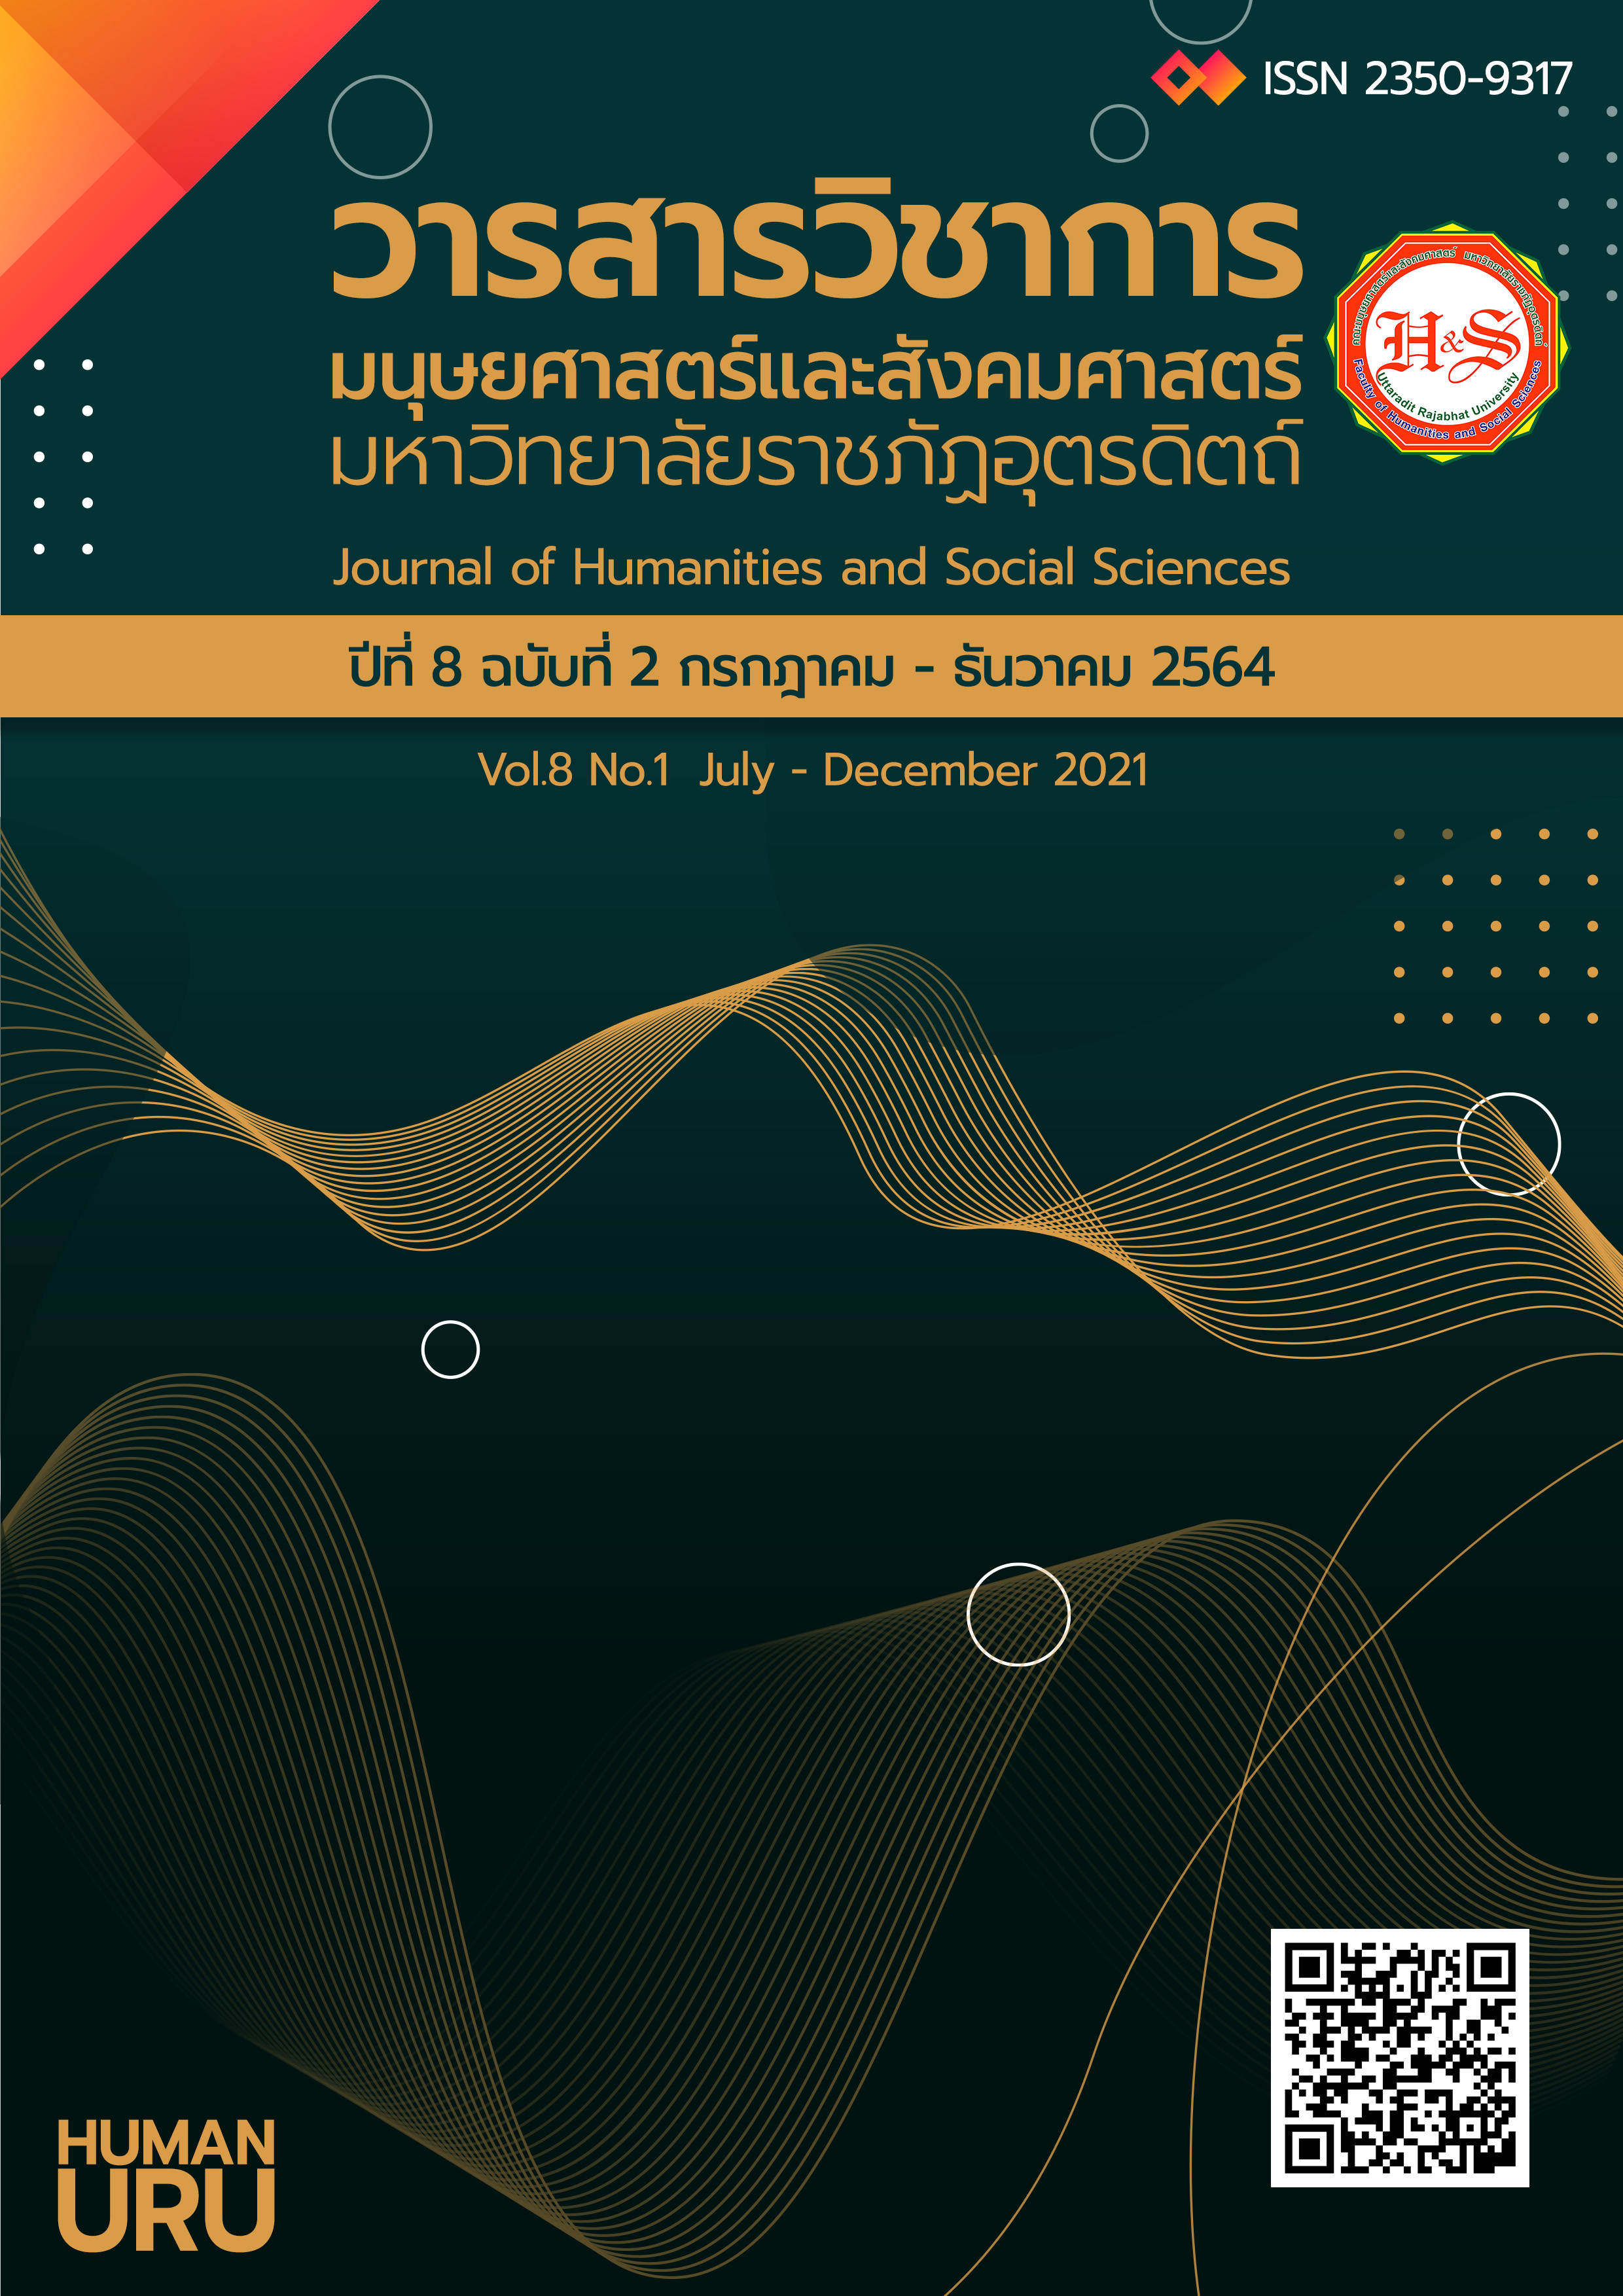 					View Vol. 8 No. 2 (2021): Journal of Humanities and Social Sciences
				